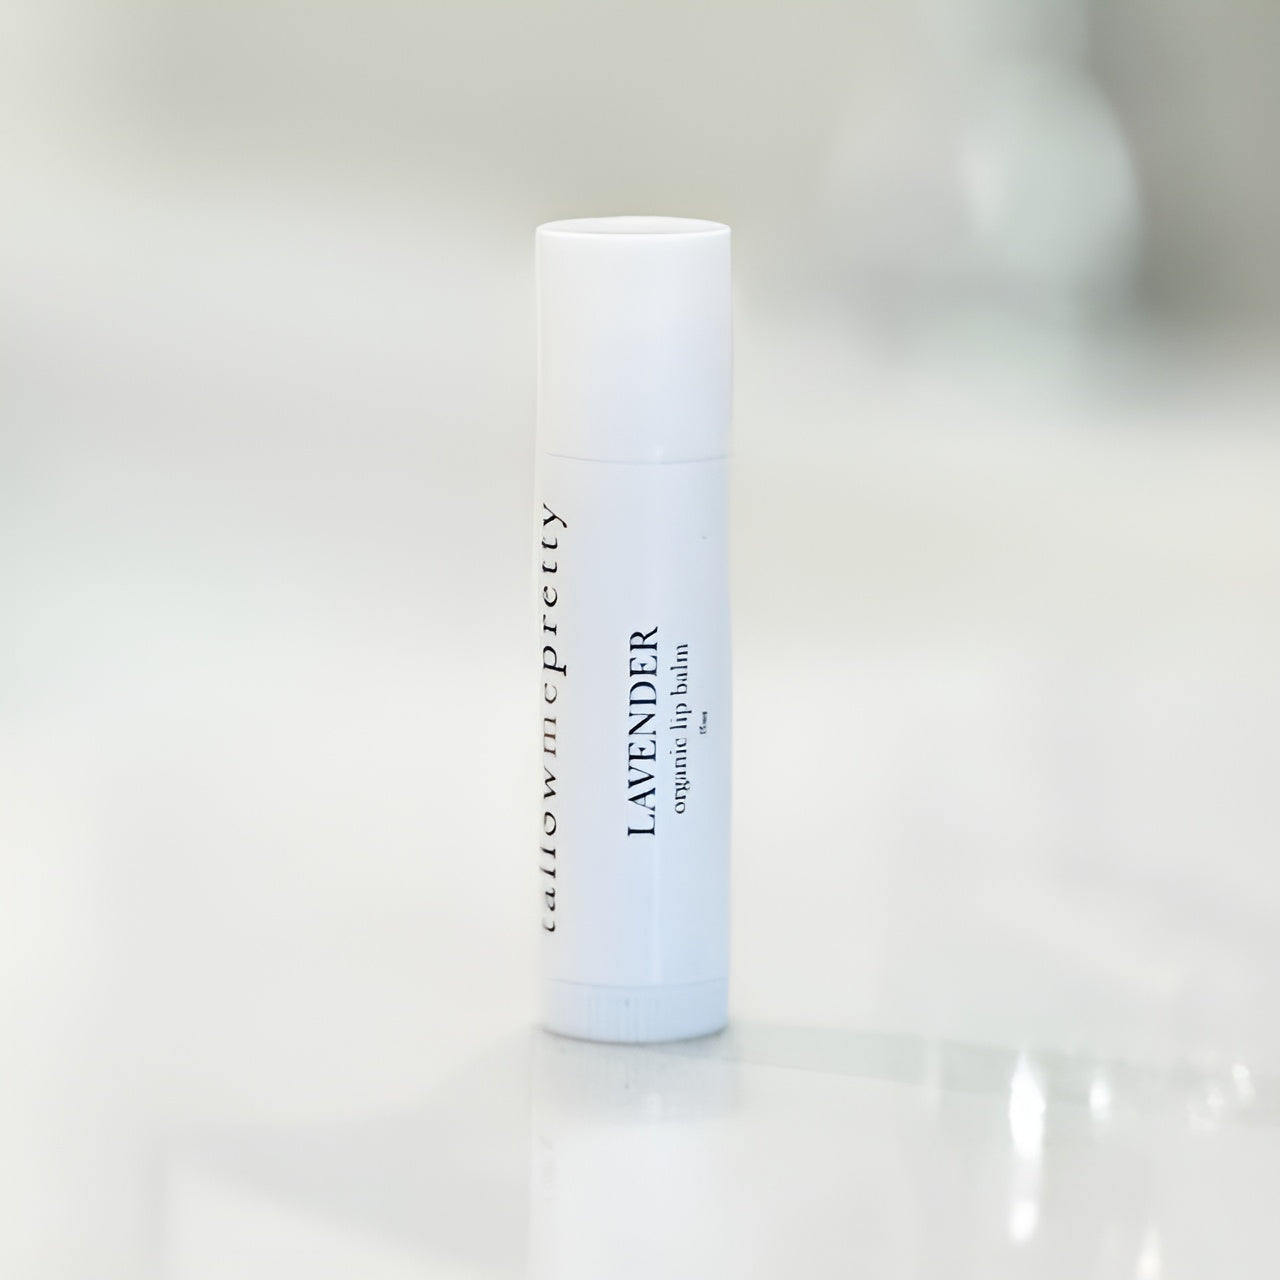 A Tallow Me Pretty Lavender Organic Lip Balm in a white, roll-up tube displayed on a glossy white surface. The tube's label is printed in elegant black typography, highlighting the organic and natural qualities of the product.